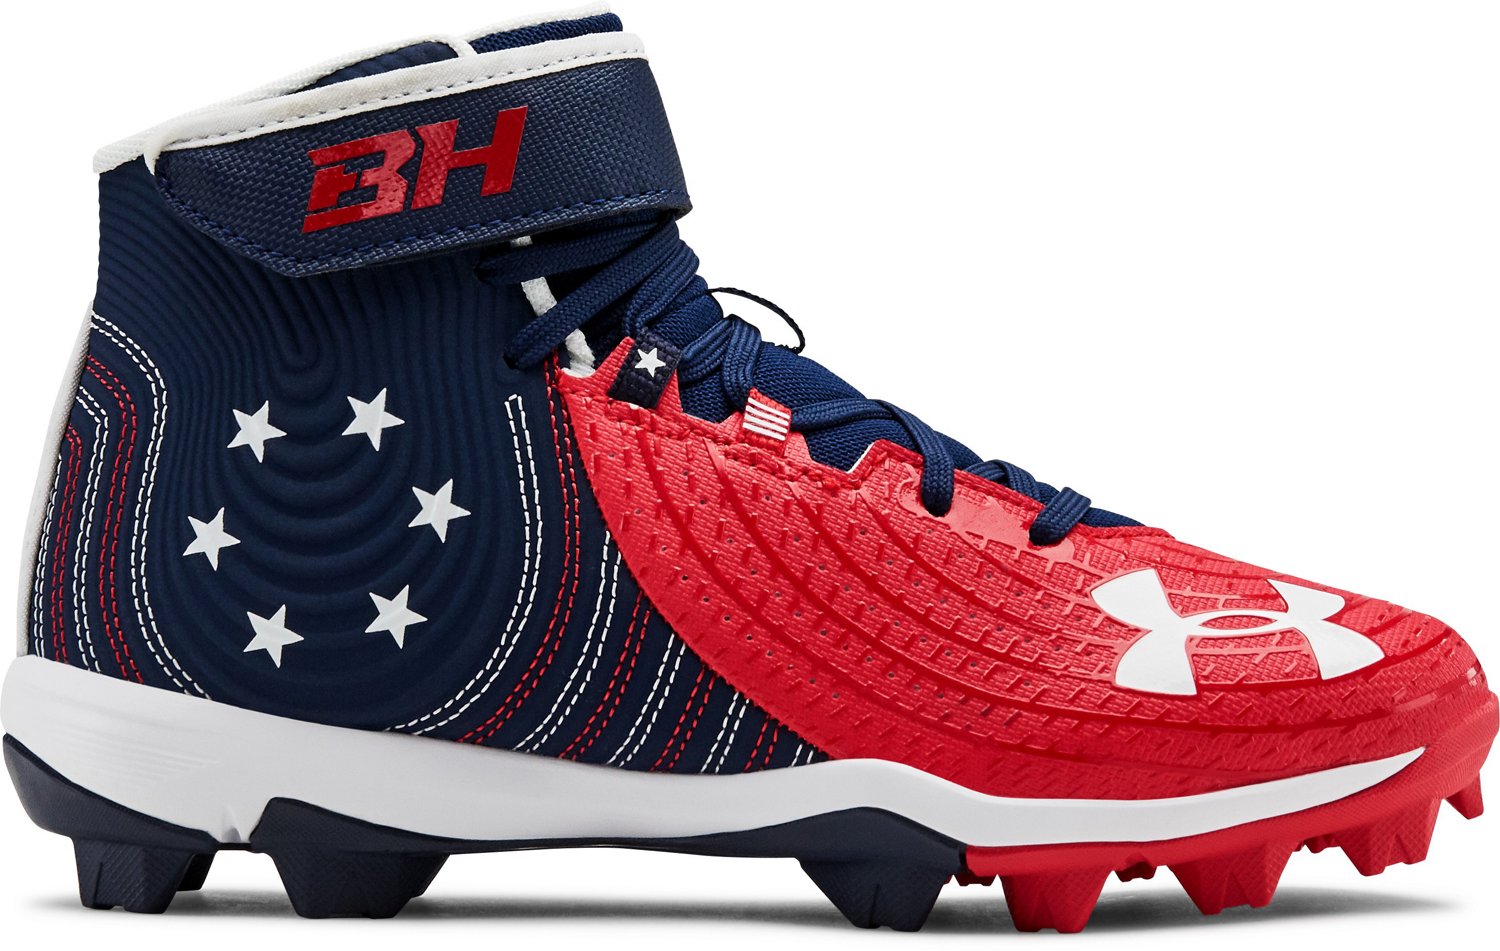 Black YOUTH 4.5 5.5 6 BASEBALL CLEATS SHOES Details about  / New UNDER ARMOUR HARPER 3 MID RM JR